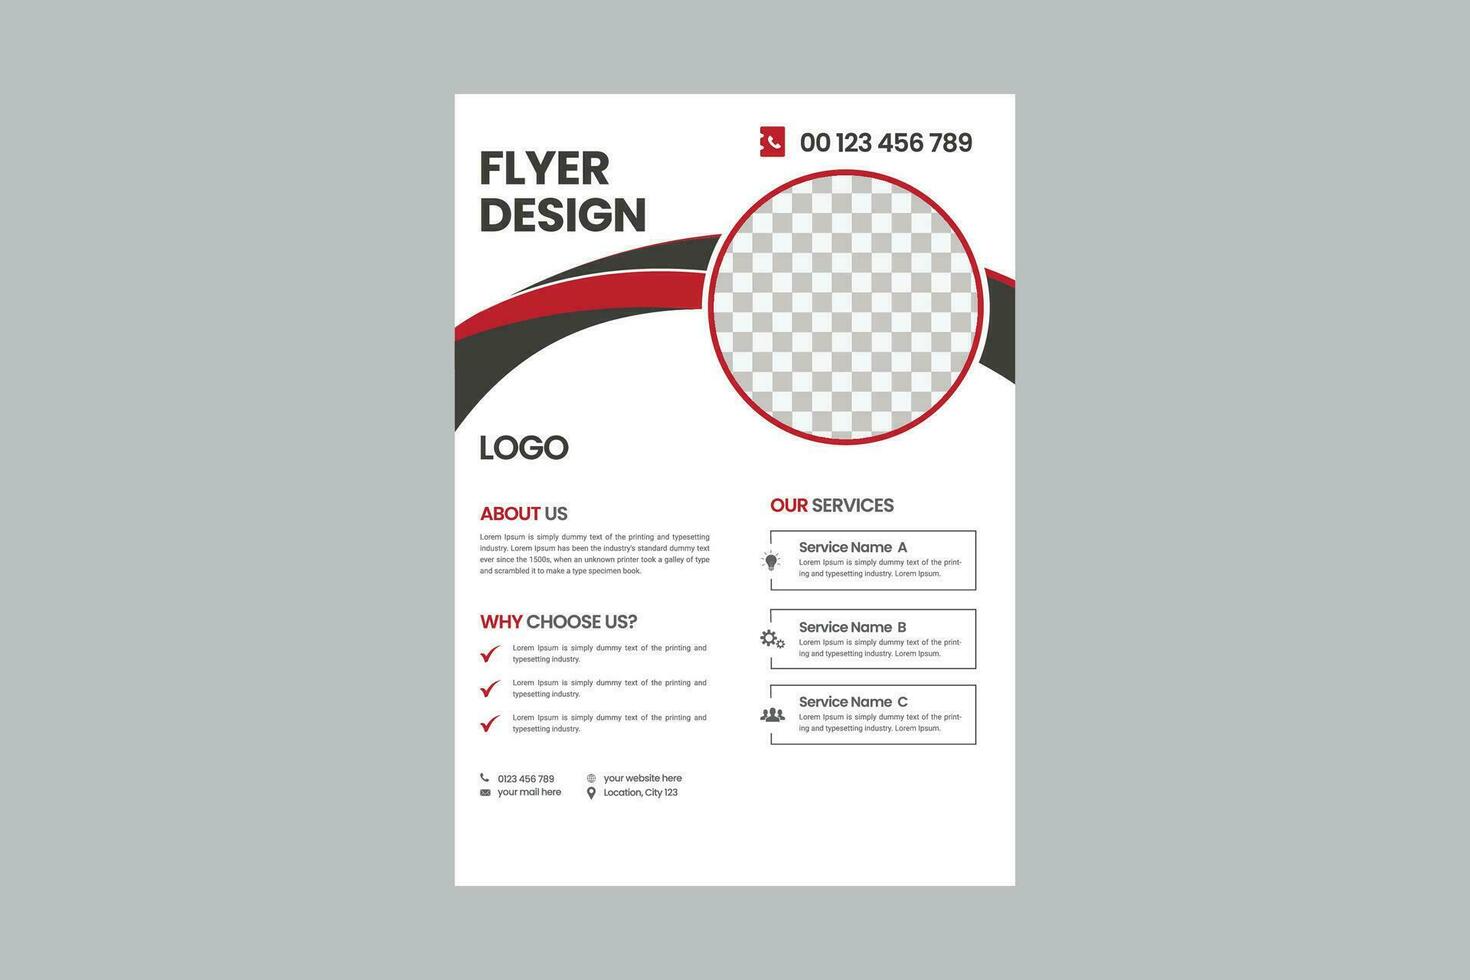 Corporate business flyer, Flyer cover design, Annual report, Corporate presentation, Agency marketing poster, Digital marketing flyer, Business brochure and editable print ready layout template design vector